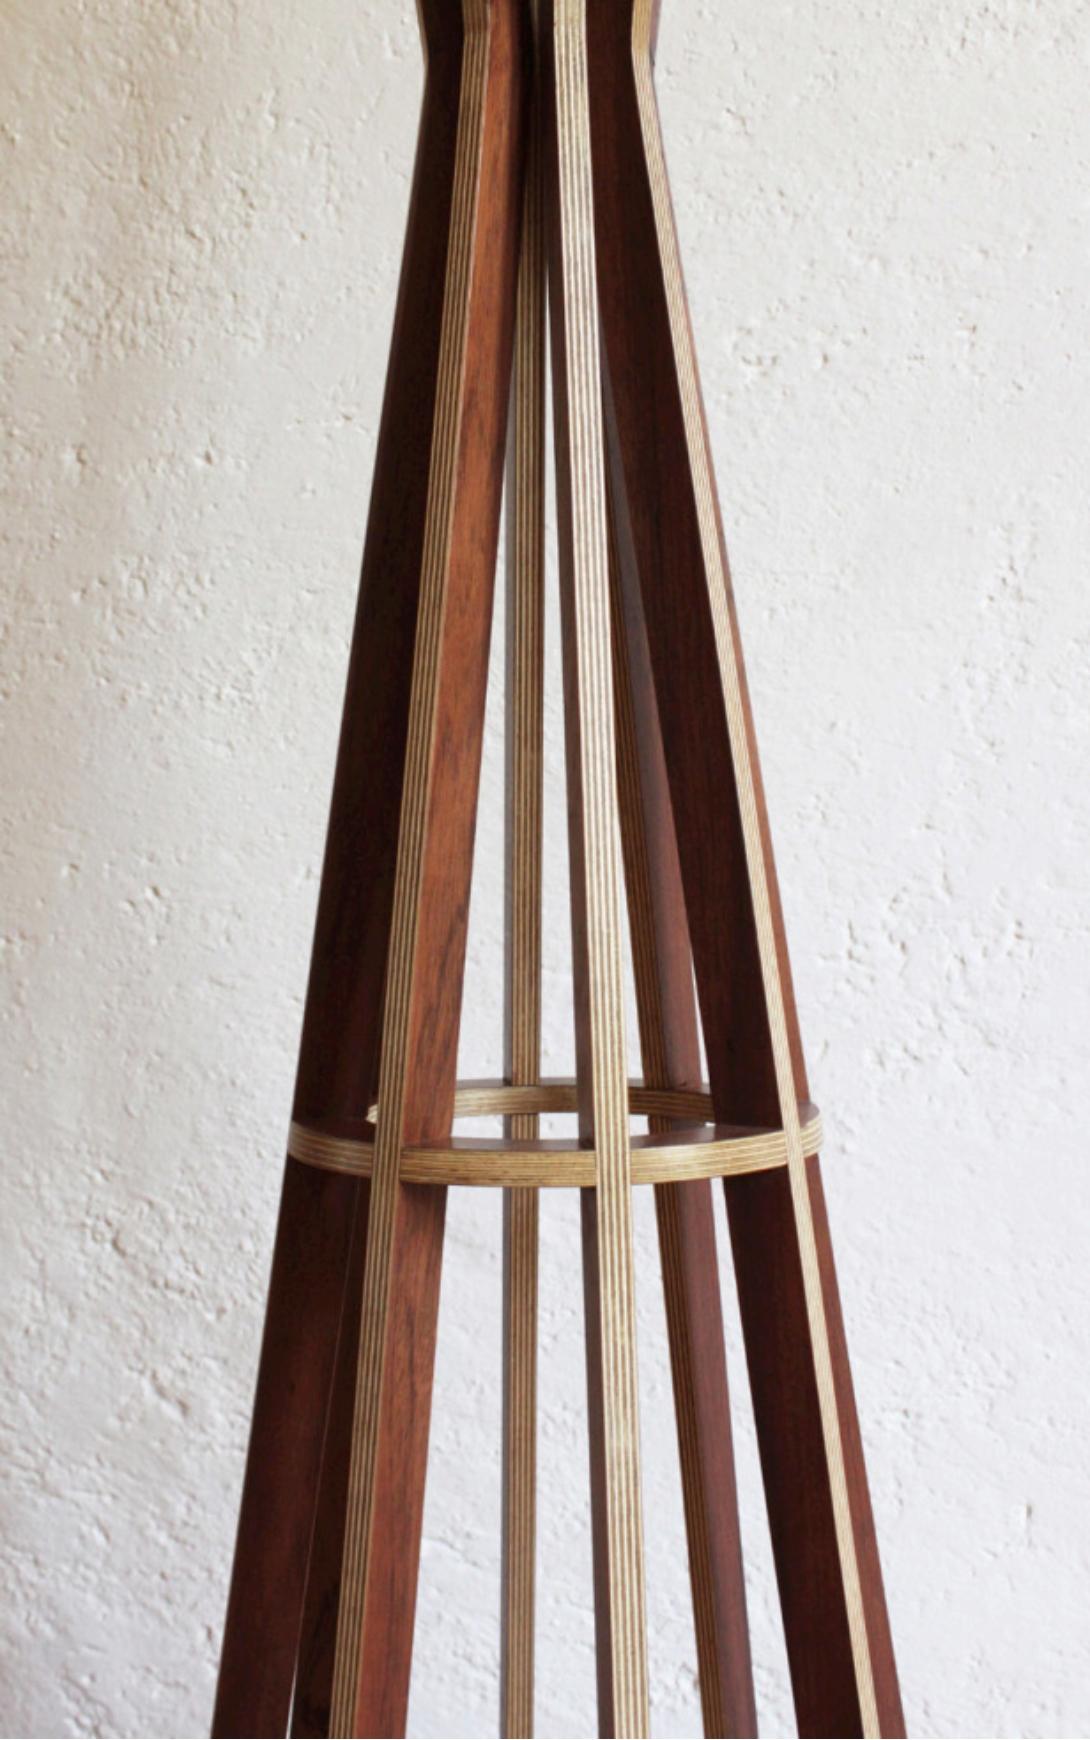 Modern Core Coat Rack by Maria Beckmann, Represented by Tuleste Factory